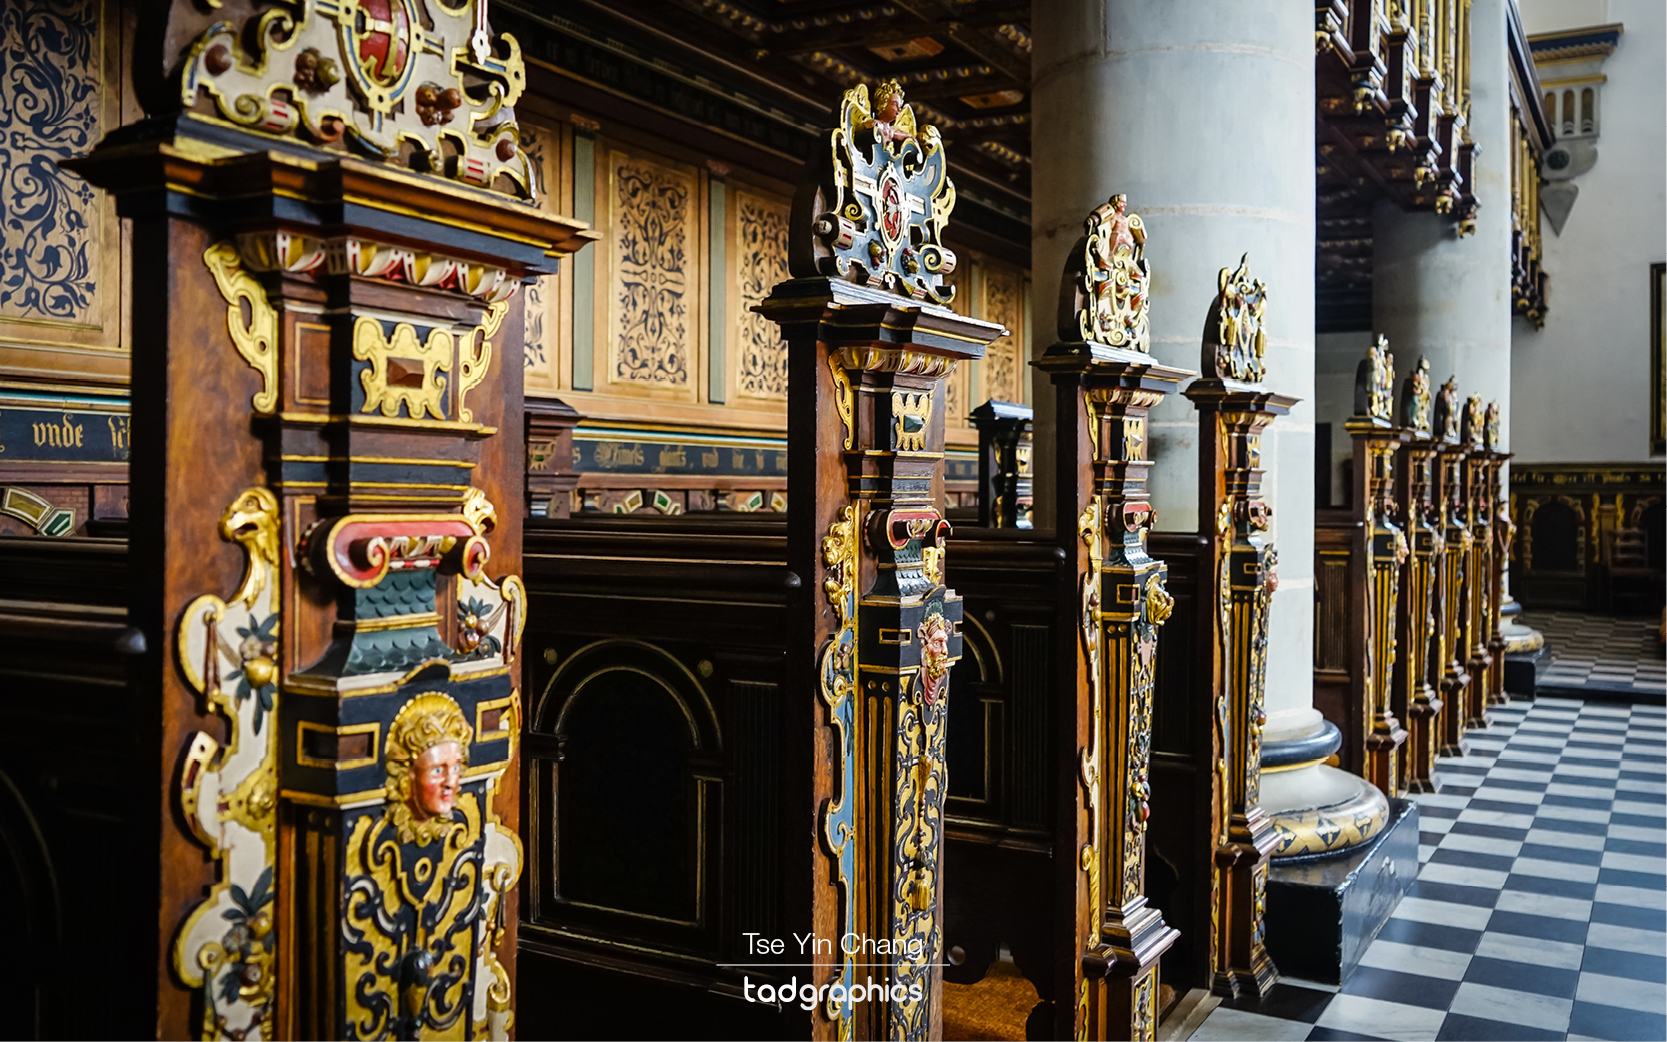 The pews topped with a painted headpiece found inside the Chapel in Kronborg Castle is unique and depicts various aspects of the royal coat of arms and religious figures and symbols.